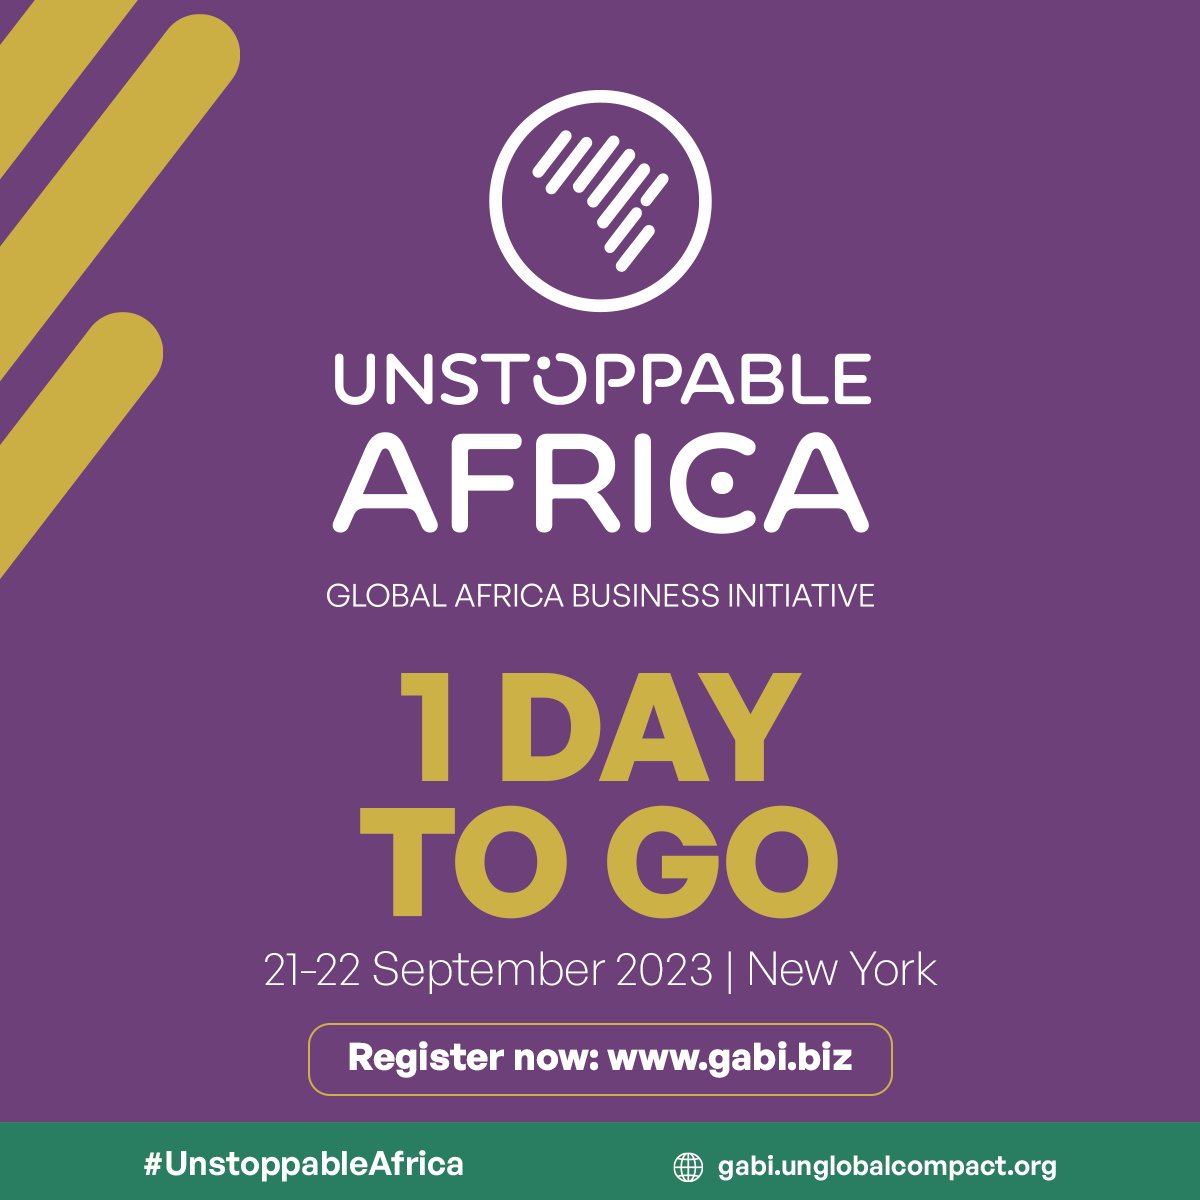 ⏰ The Global Africa Business Initiative’s “Unstoppable Africa” event is just a day away!

📅September 21 and 22, 2023

📍 Location: New York and online

Register to join virtually: gabi.biz

#GABI2023 #AfricaRising #UnstoppableAfrica UN @globalcompact